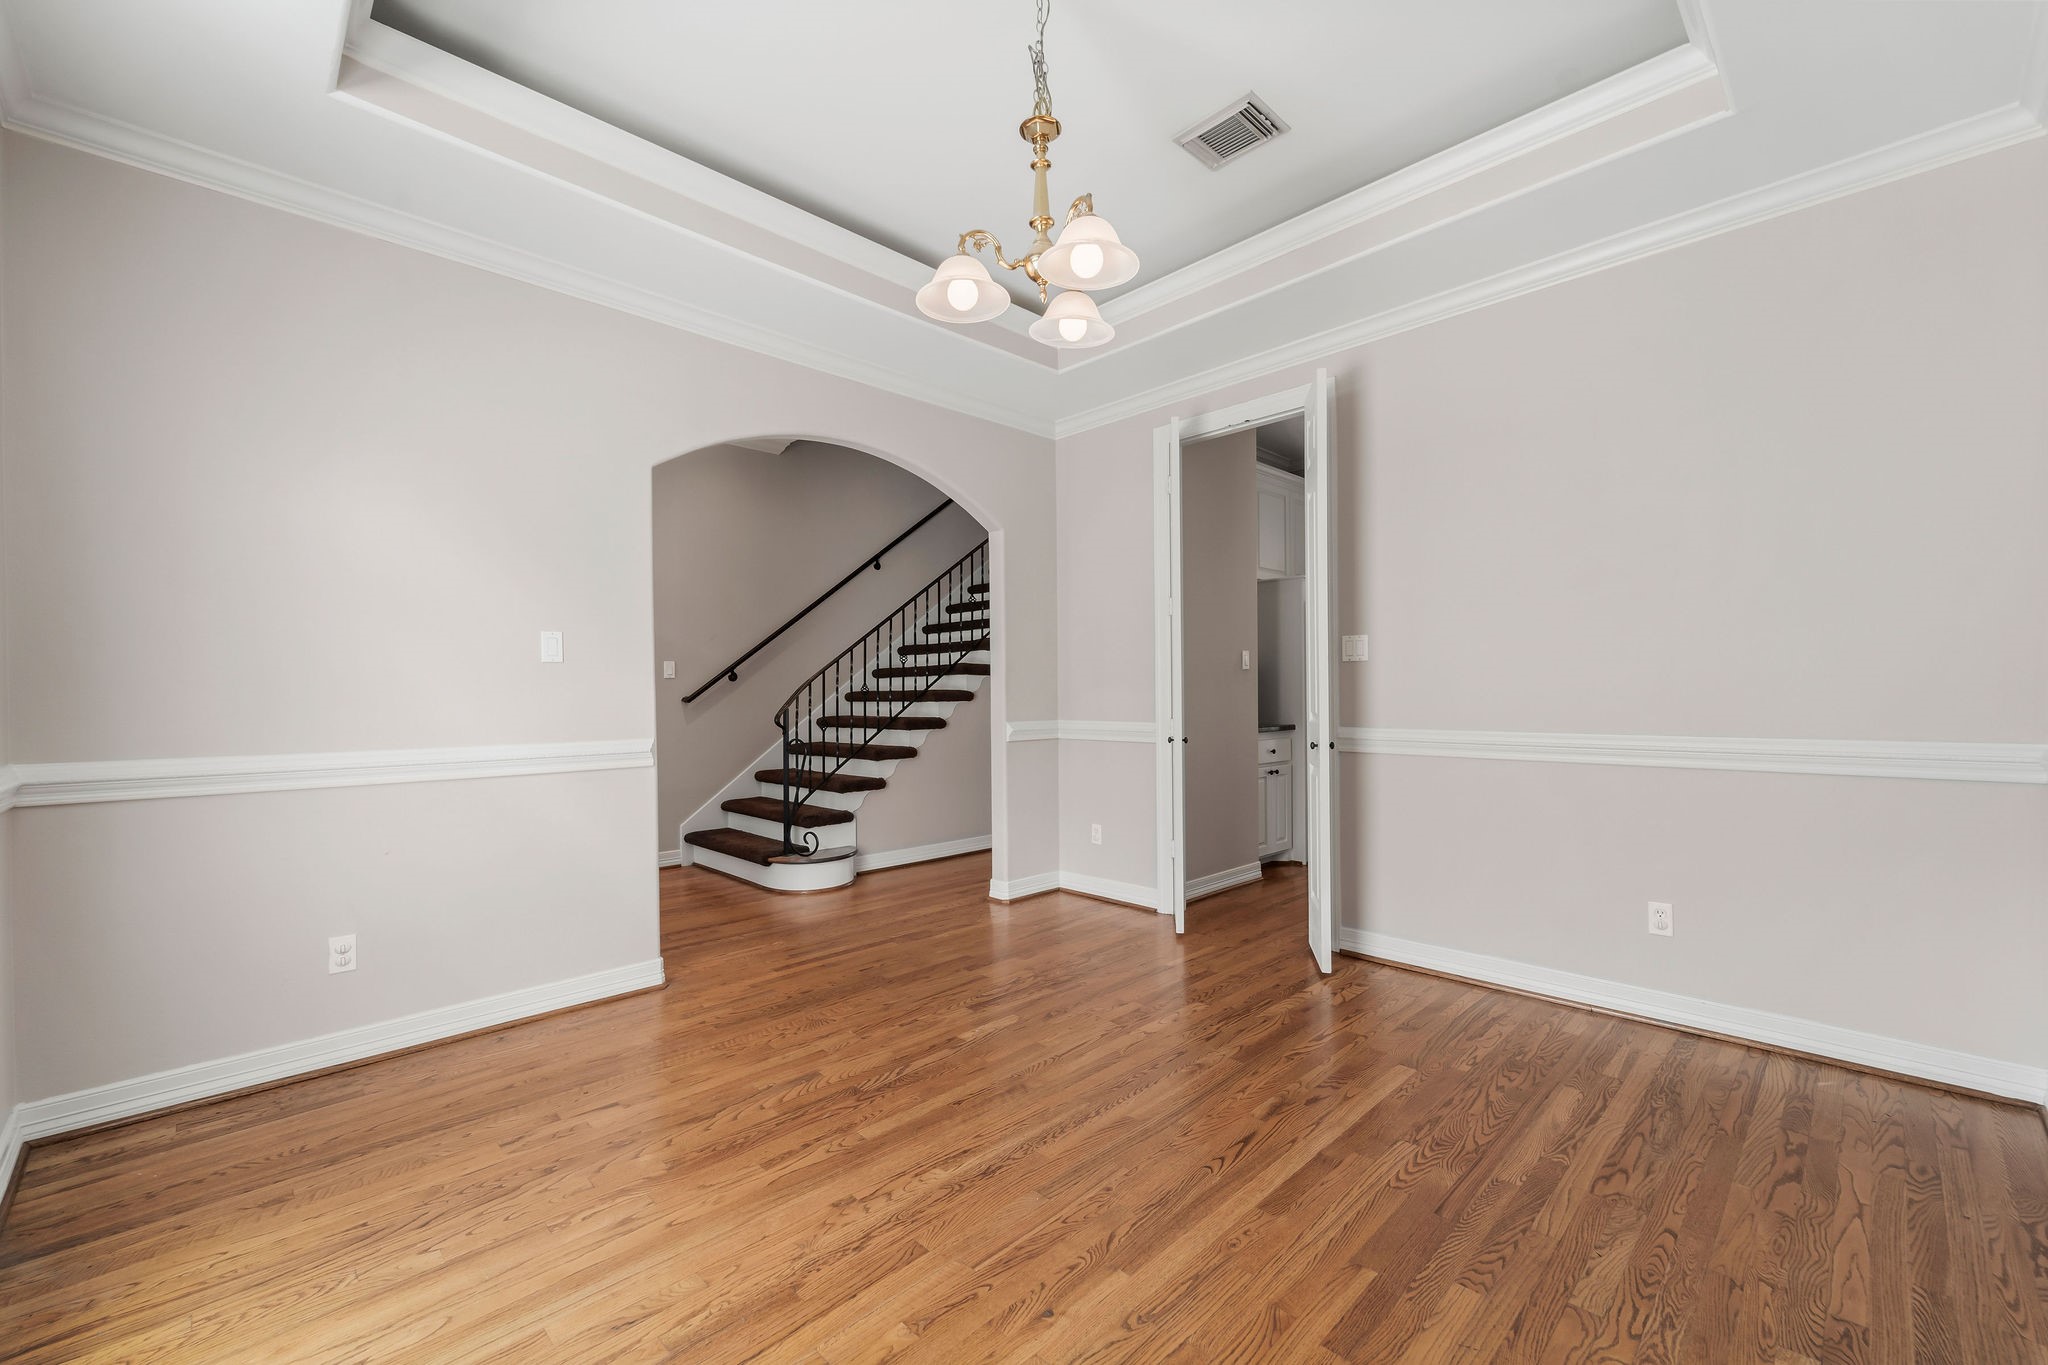 Alternate view of dining room. Located in the front of the house, can also be a home office, study or game room.Beautiful hardwood floors. Crown moulding. High ceilings.